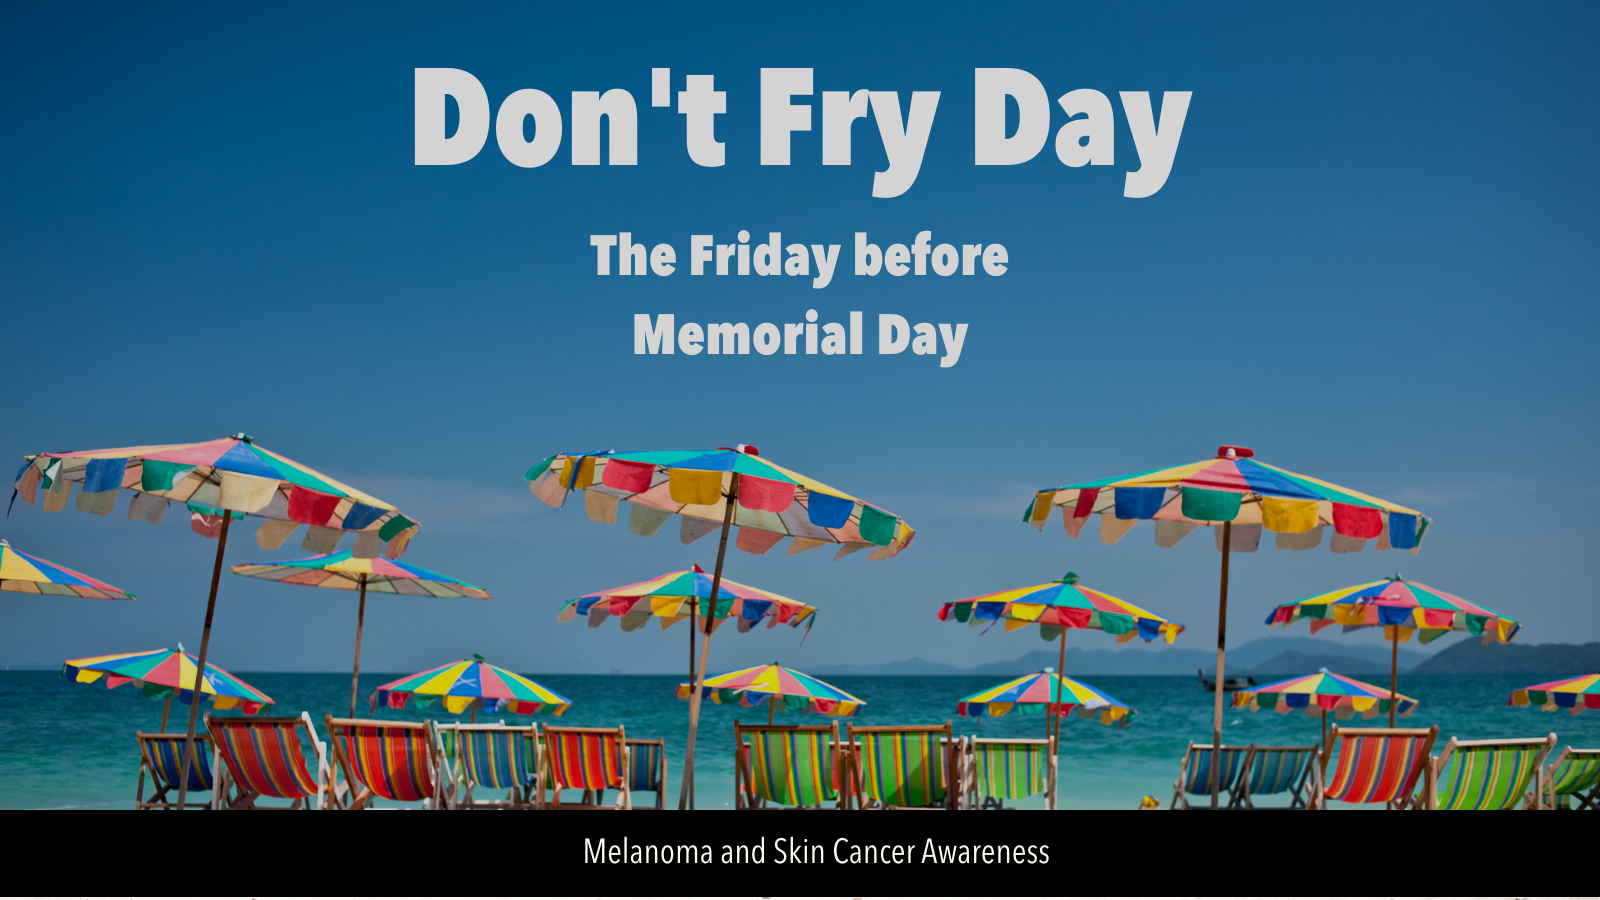 Image of rainbow beach umbrellas and chairs at the beach. Text reads Don't Fry Day, the Friday before Memorial Day